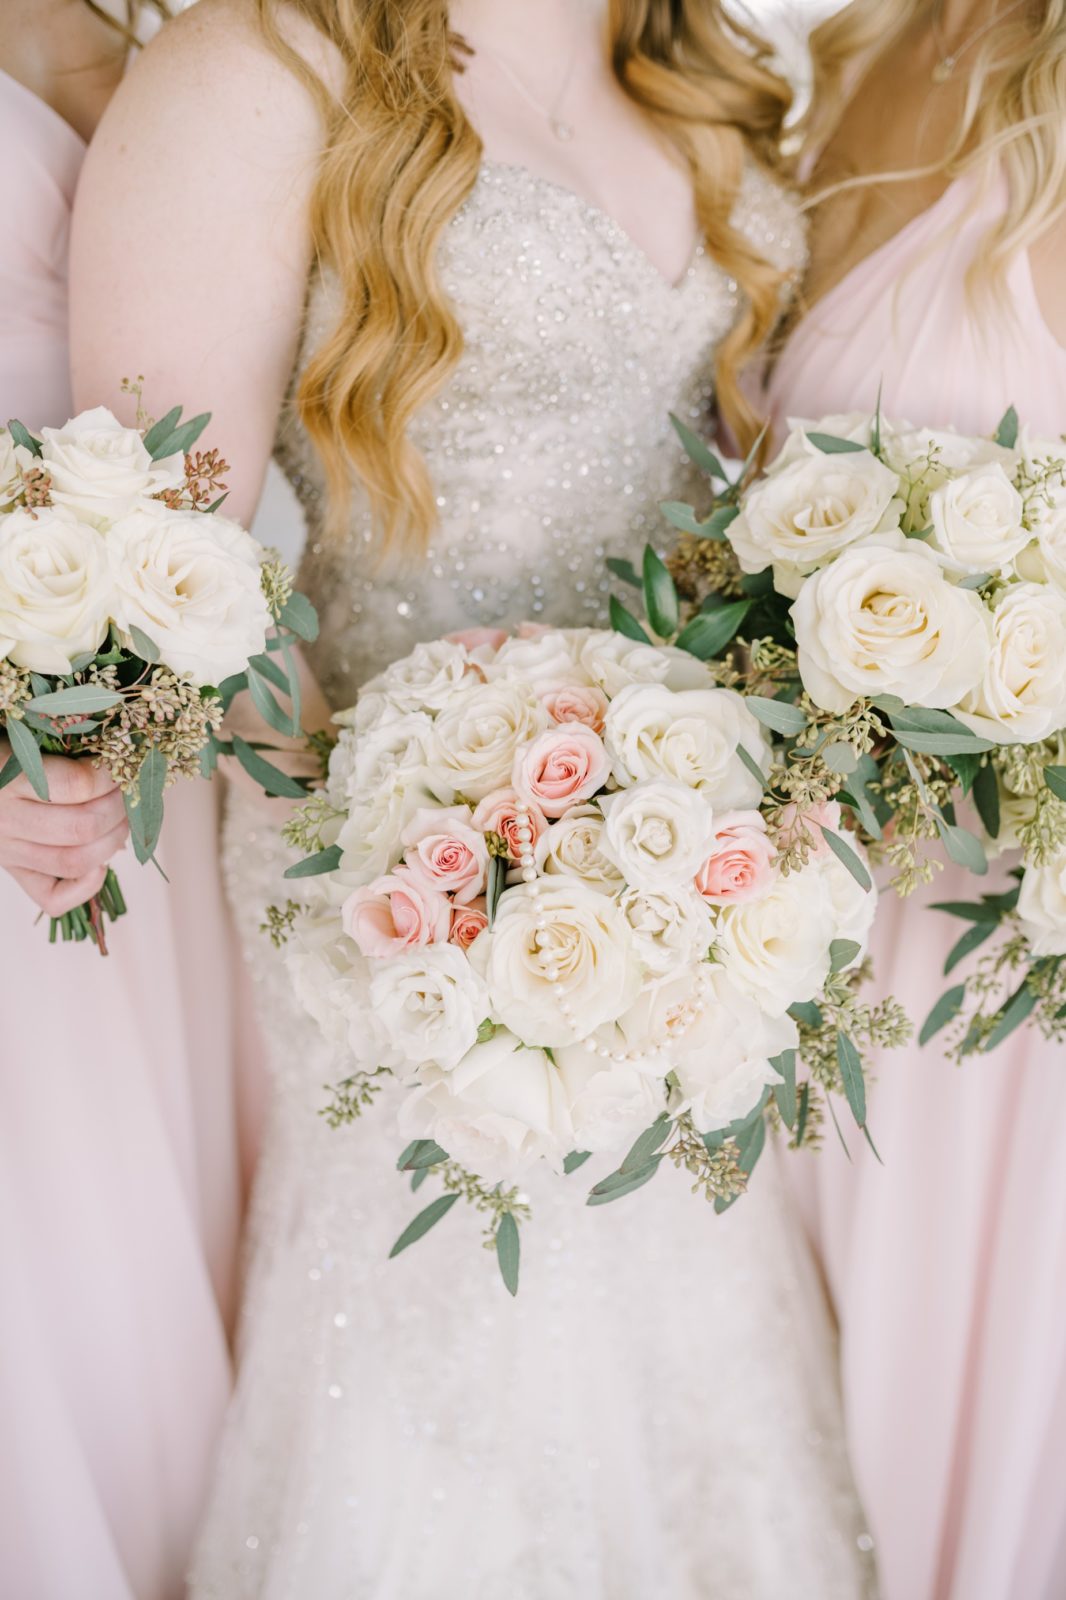 At Still Waters Ranch Christina Elliott Photography captures a detailed shot of the bridal bouquet. rose bridal bouquet pink #ChristinaElliottPhotography #ChristinaElliottWeddings #StillWatersRanchWedding #Texasweddings #countrywedding #ranchwedding